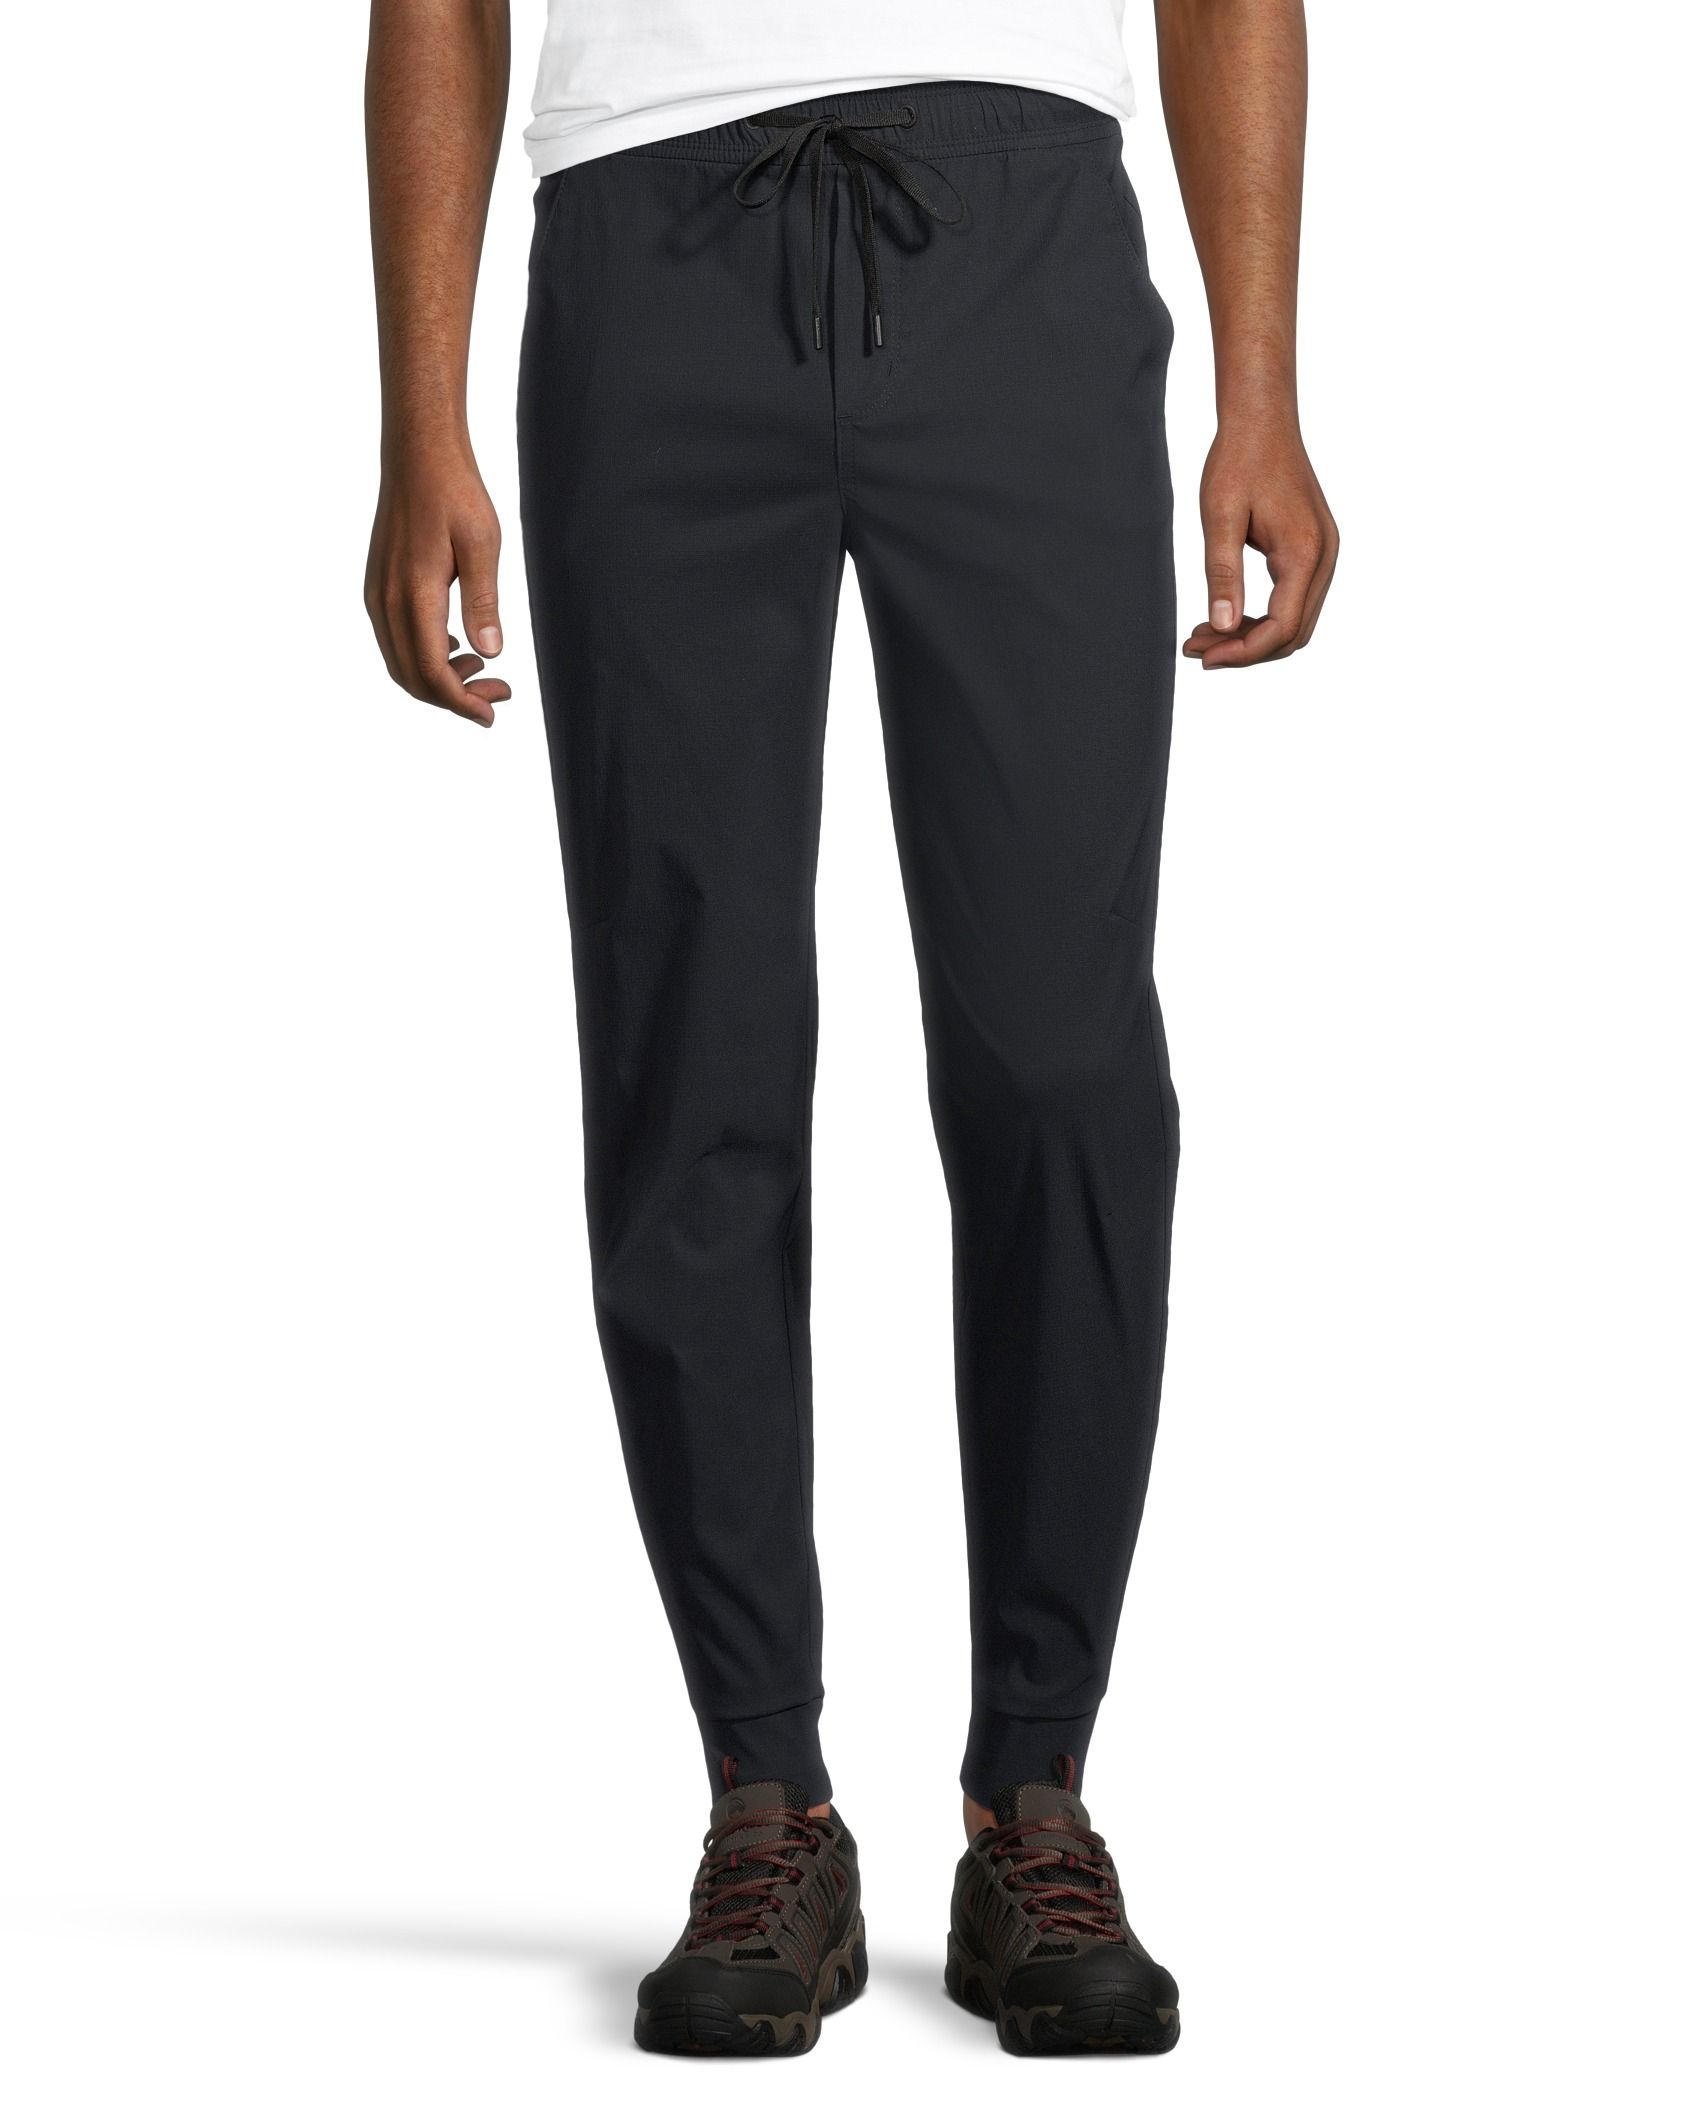 WindRiver Men's Stretch Ripstop Jogger Pants | Marks